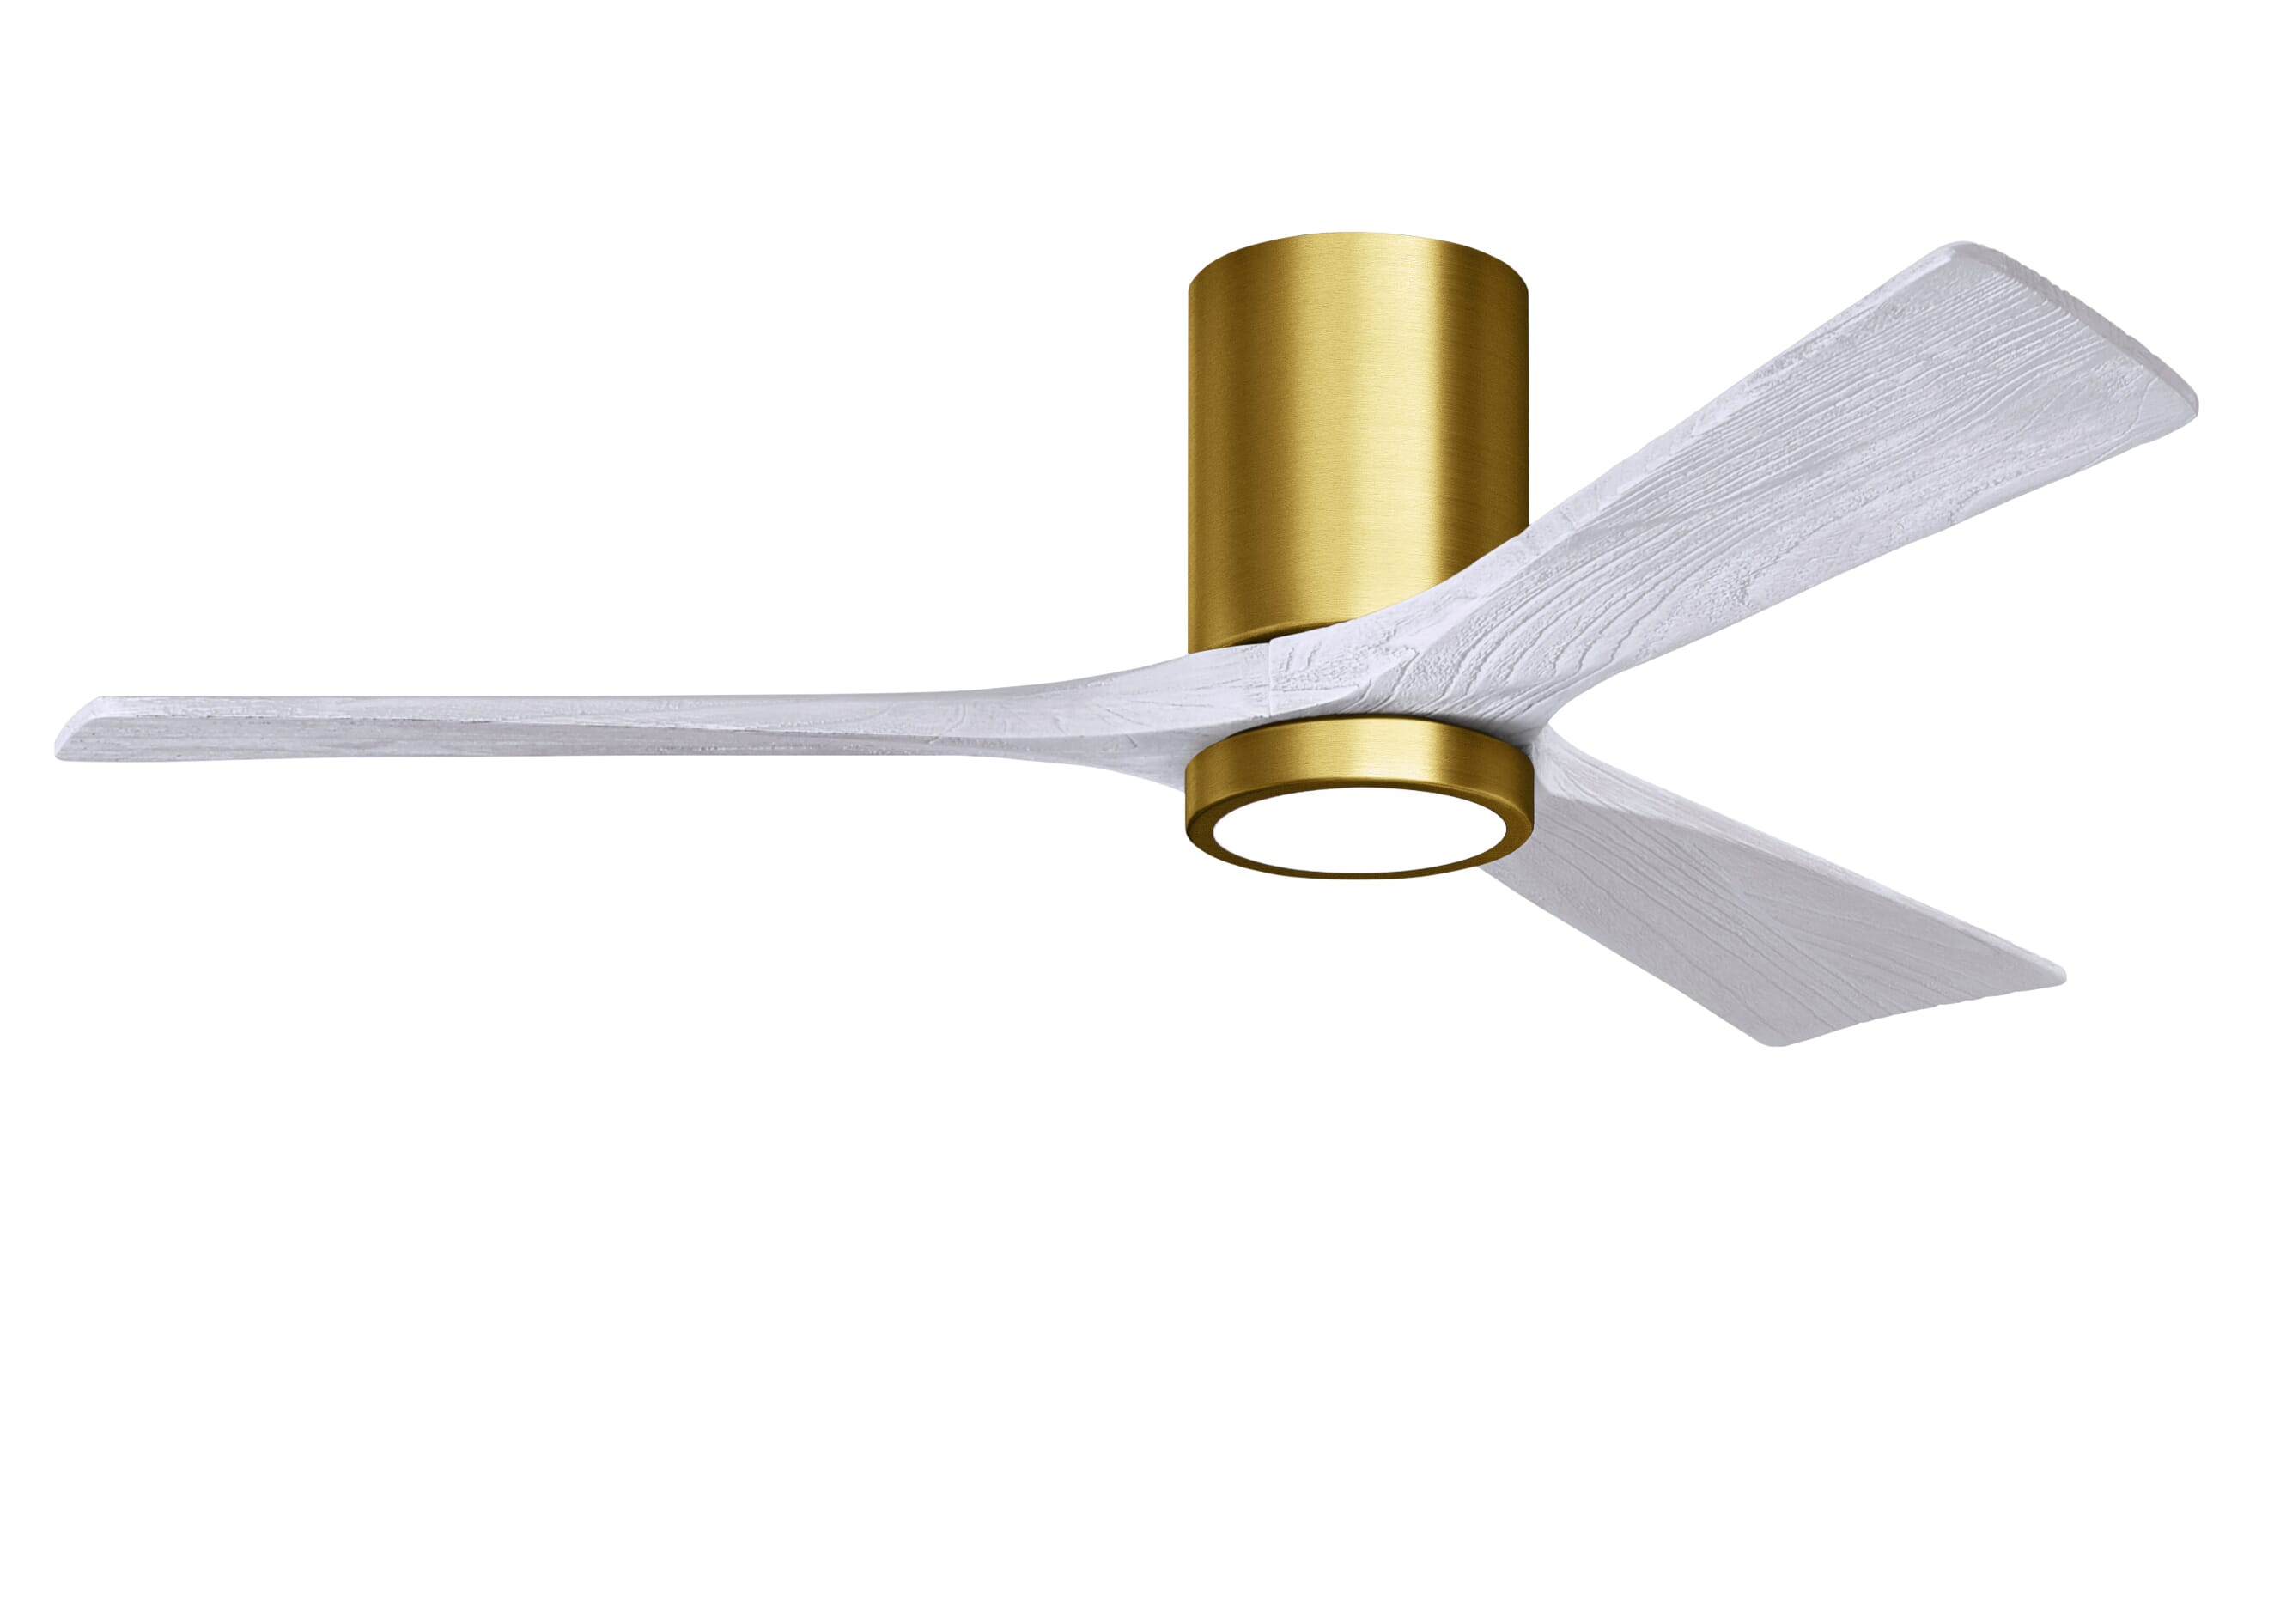 Irene 6-Speed DC 52"" Ceiling Fan w/ Integrated Light Kit in Brushed Brass with Matte White blades -  Matthews Fan Company, IR3HLK-BRBR-MWH-52